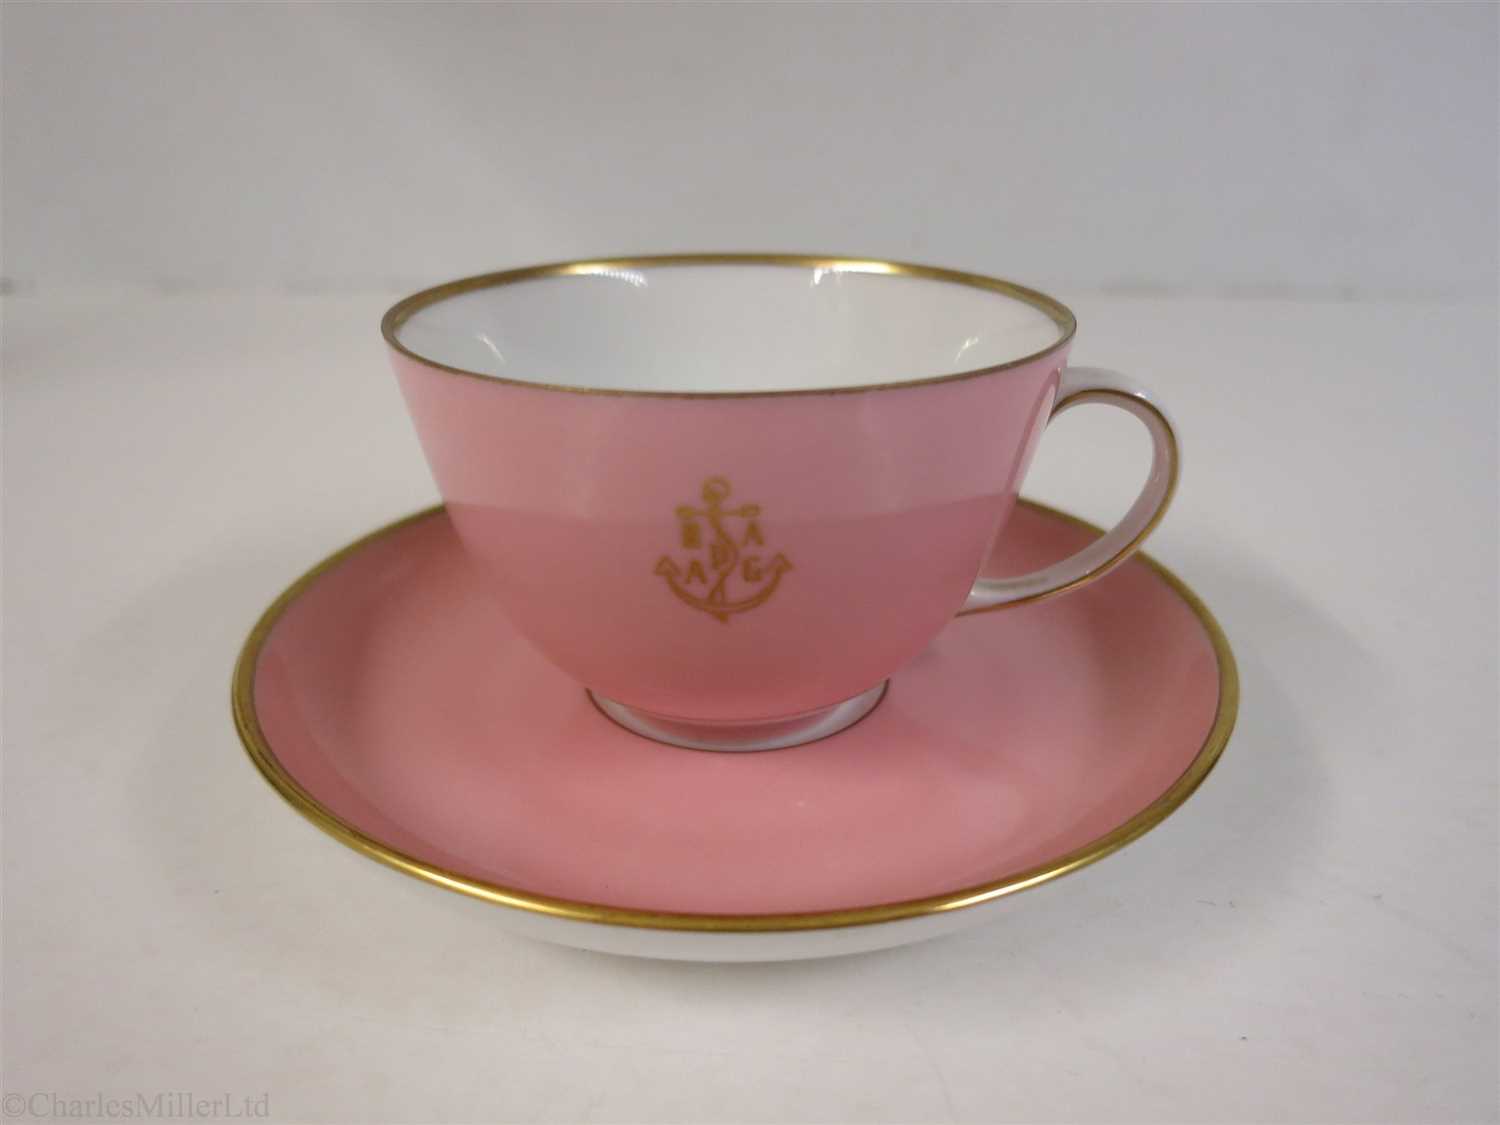 Lot 55 - HAMBURG-AMERICAN (H.A.P.A.G.) LINE: A PINK PORCELAIN COFFEE CUP AND SAUCER BY FÜRSTENBERG, GERMANY, CIRCA 1950